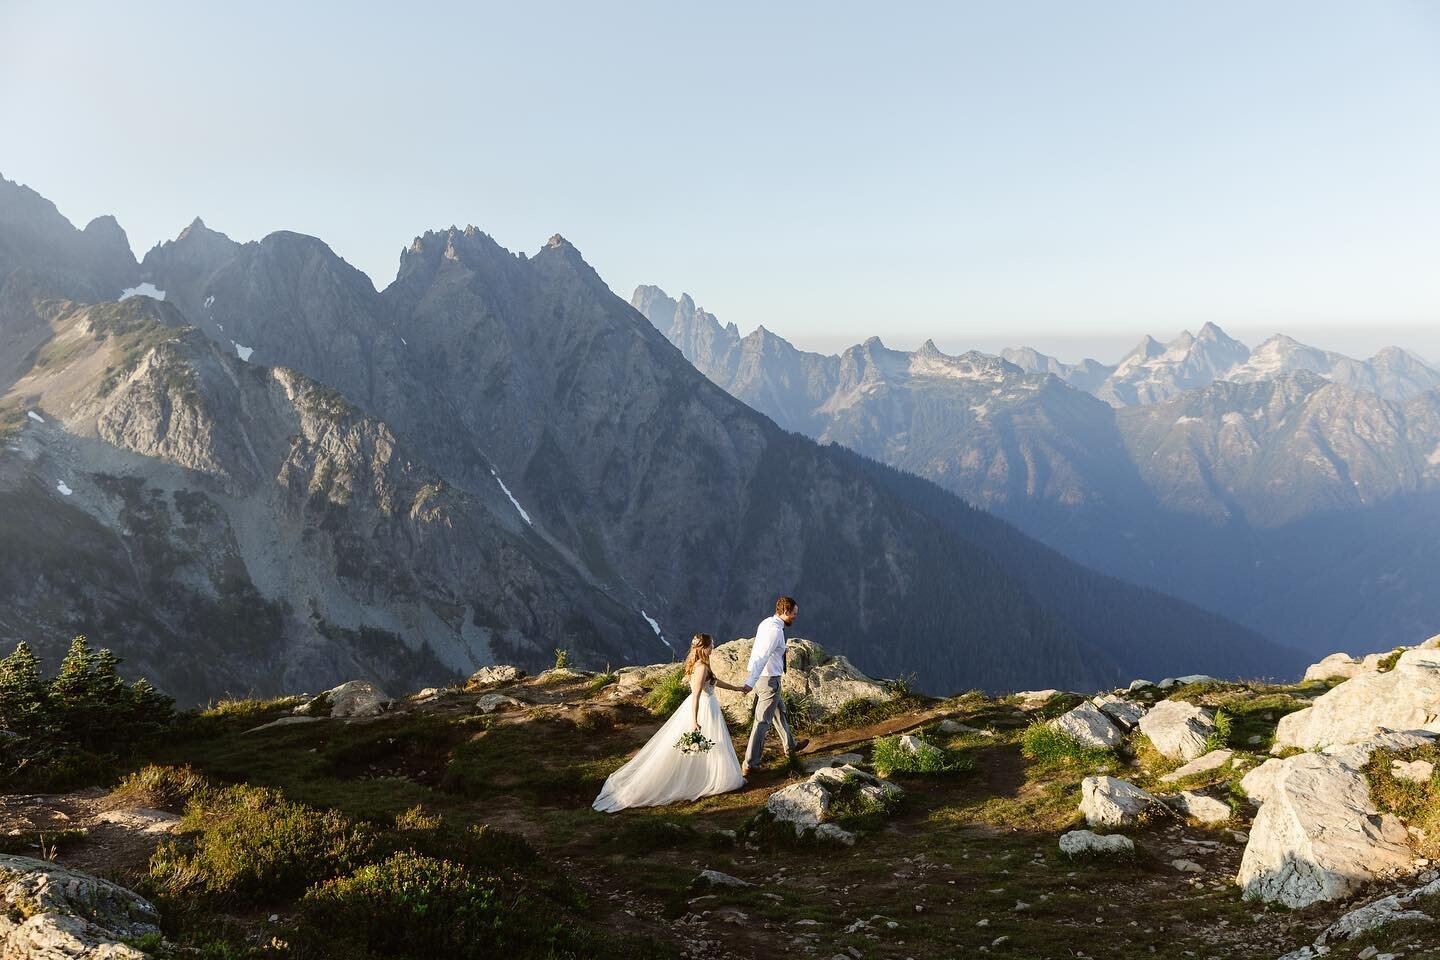 Scenes from adventure hiking elopement in the North Cascades!

Fun fact&mdash;Garrett and I almost eloped at this location! It&rsquo;s truly one of the best hikes in the area. You get incredible 360 views for a hike that is under 4 miles RT. It rarel